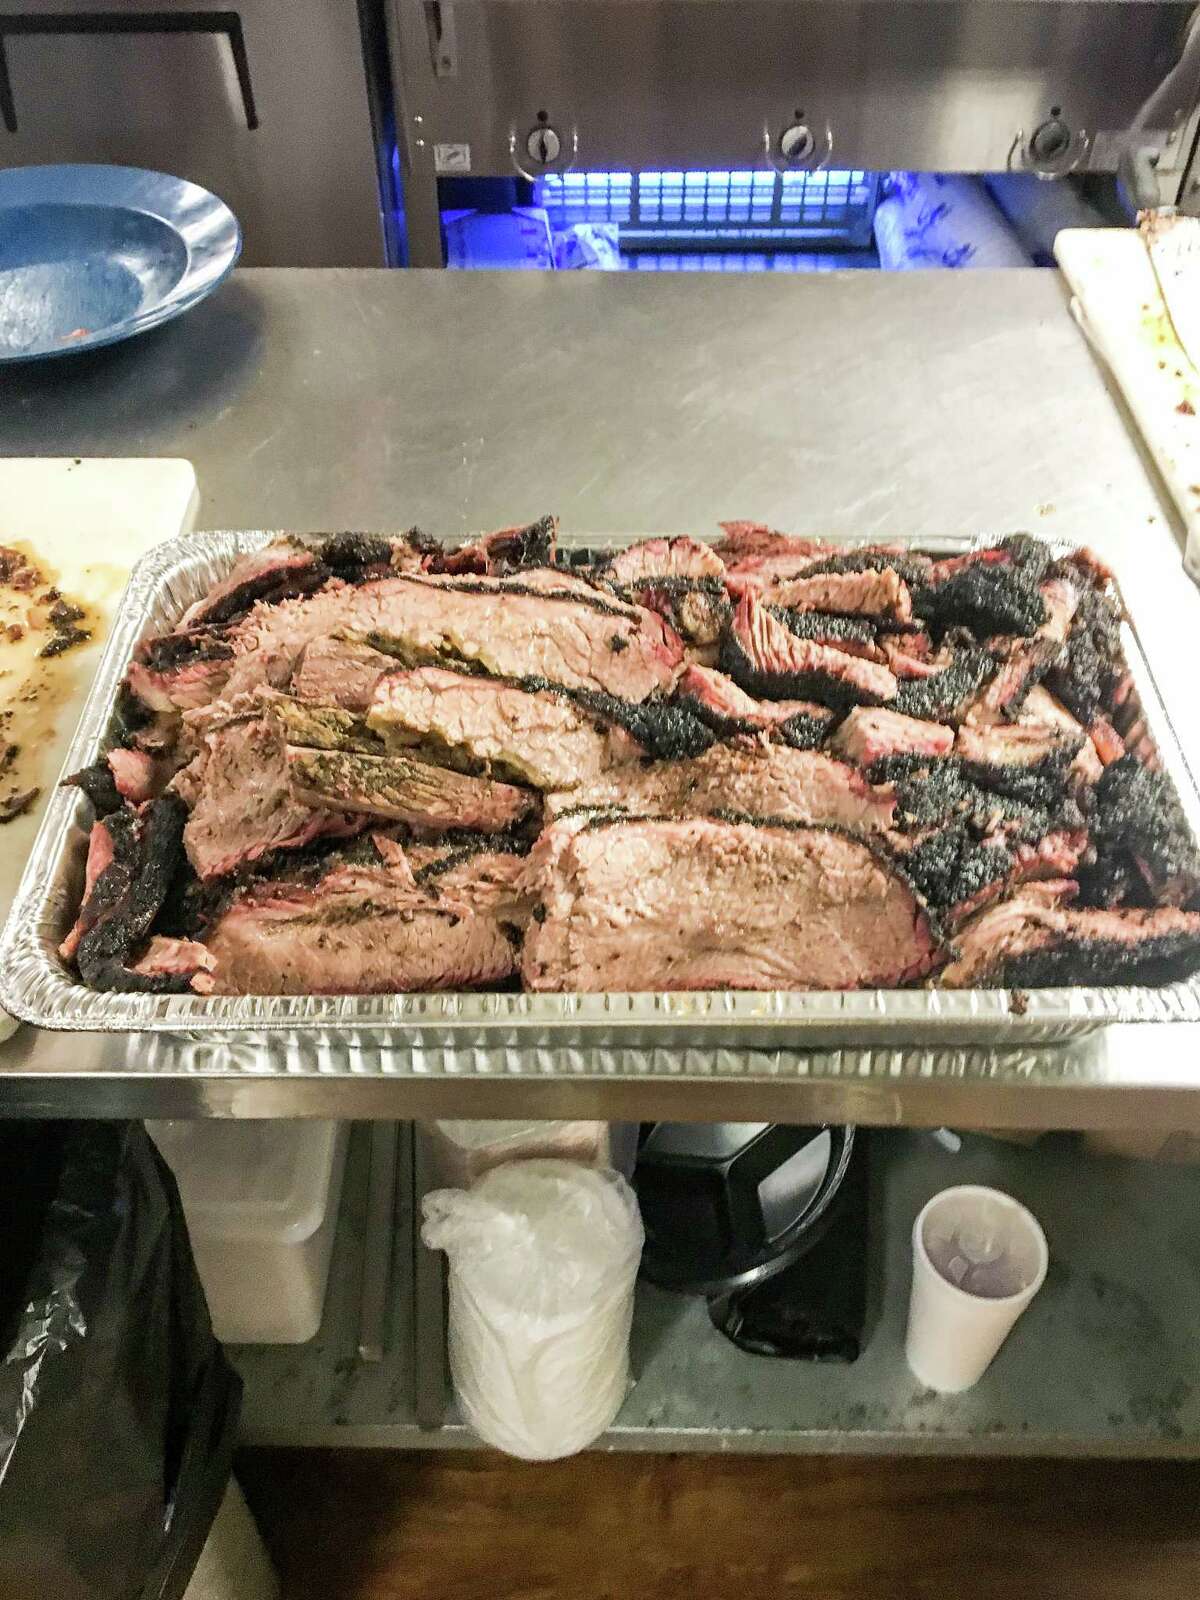 A tray of brisket at Tin Roof BBQ, prepared for first responders in Kingwood after Hurricane Harvey